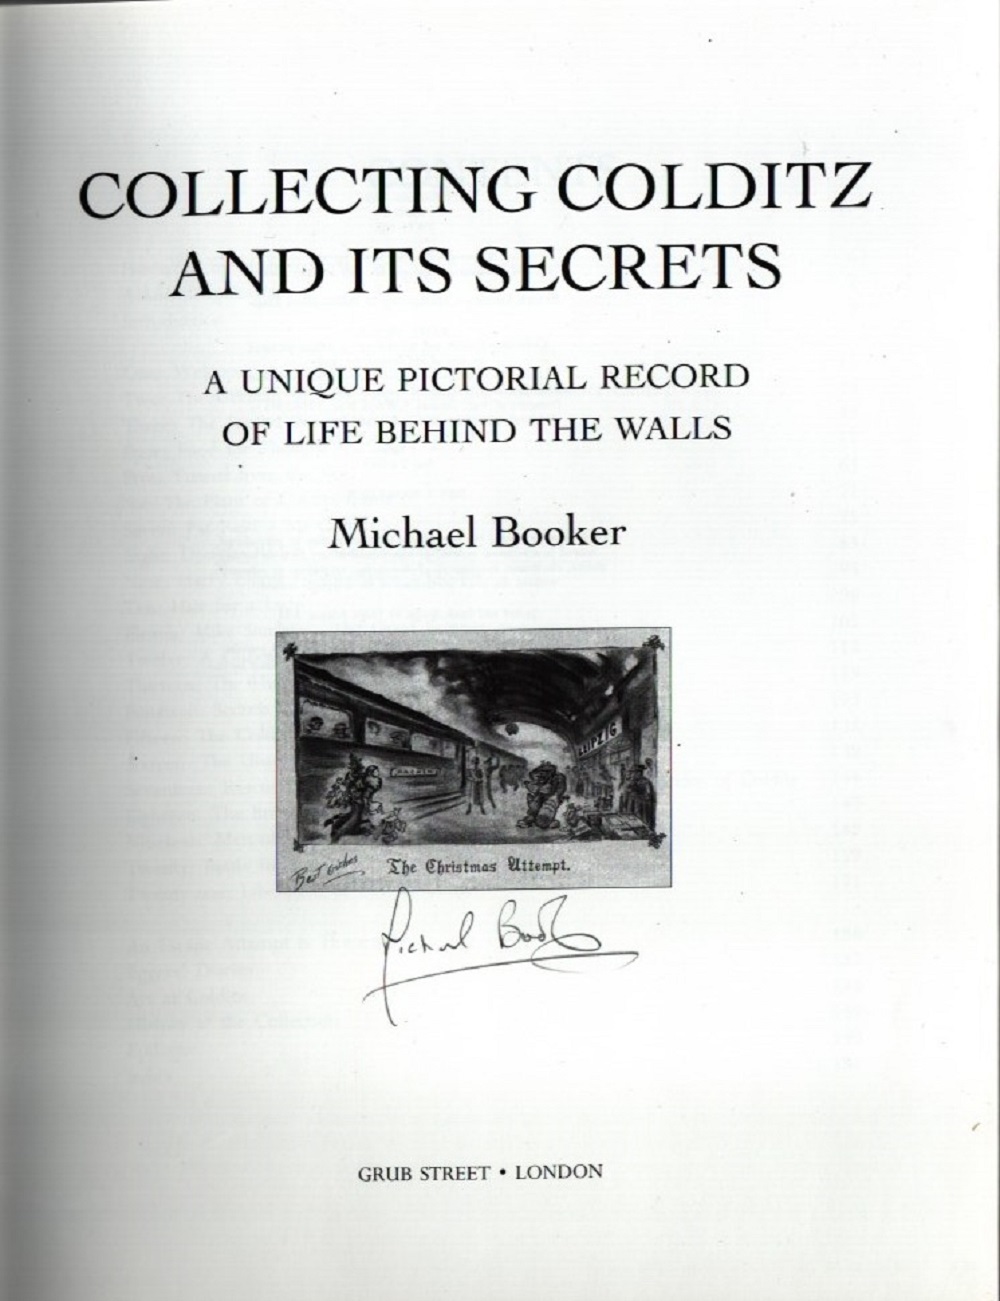 Collecting Colditz and Its Secrets by Michael Booker, First Edition, Signed by Author (No Dust